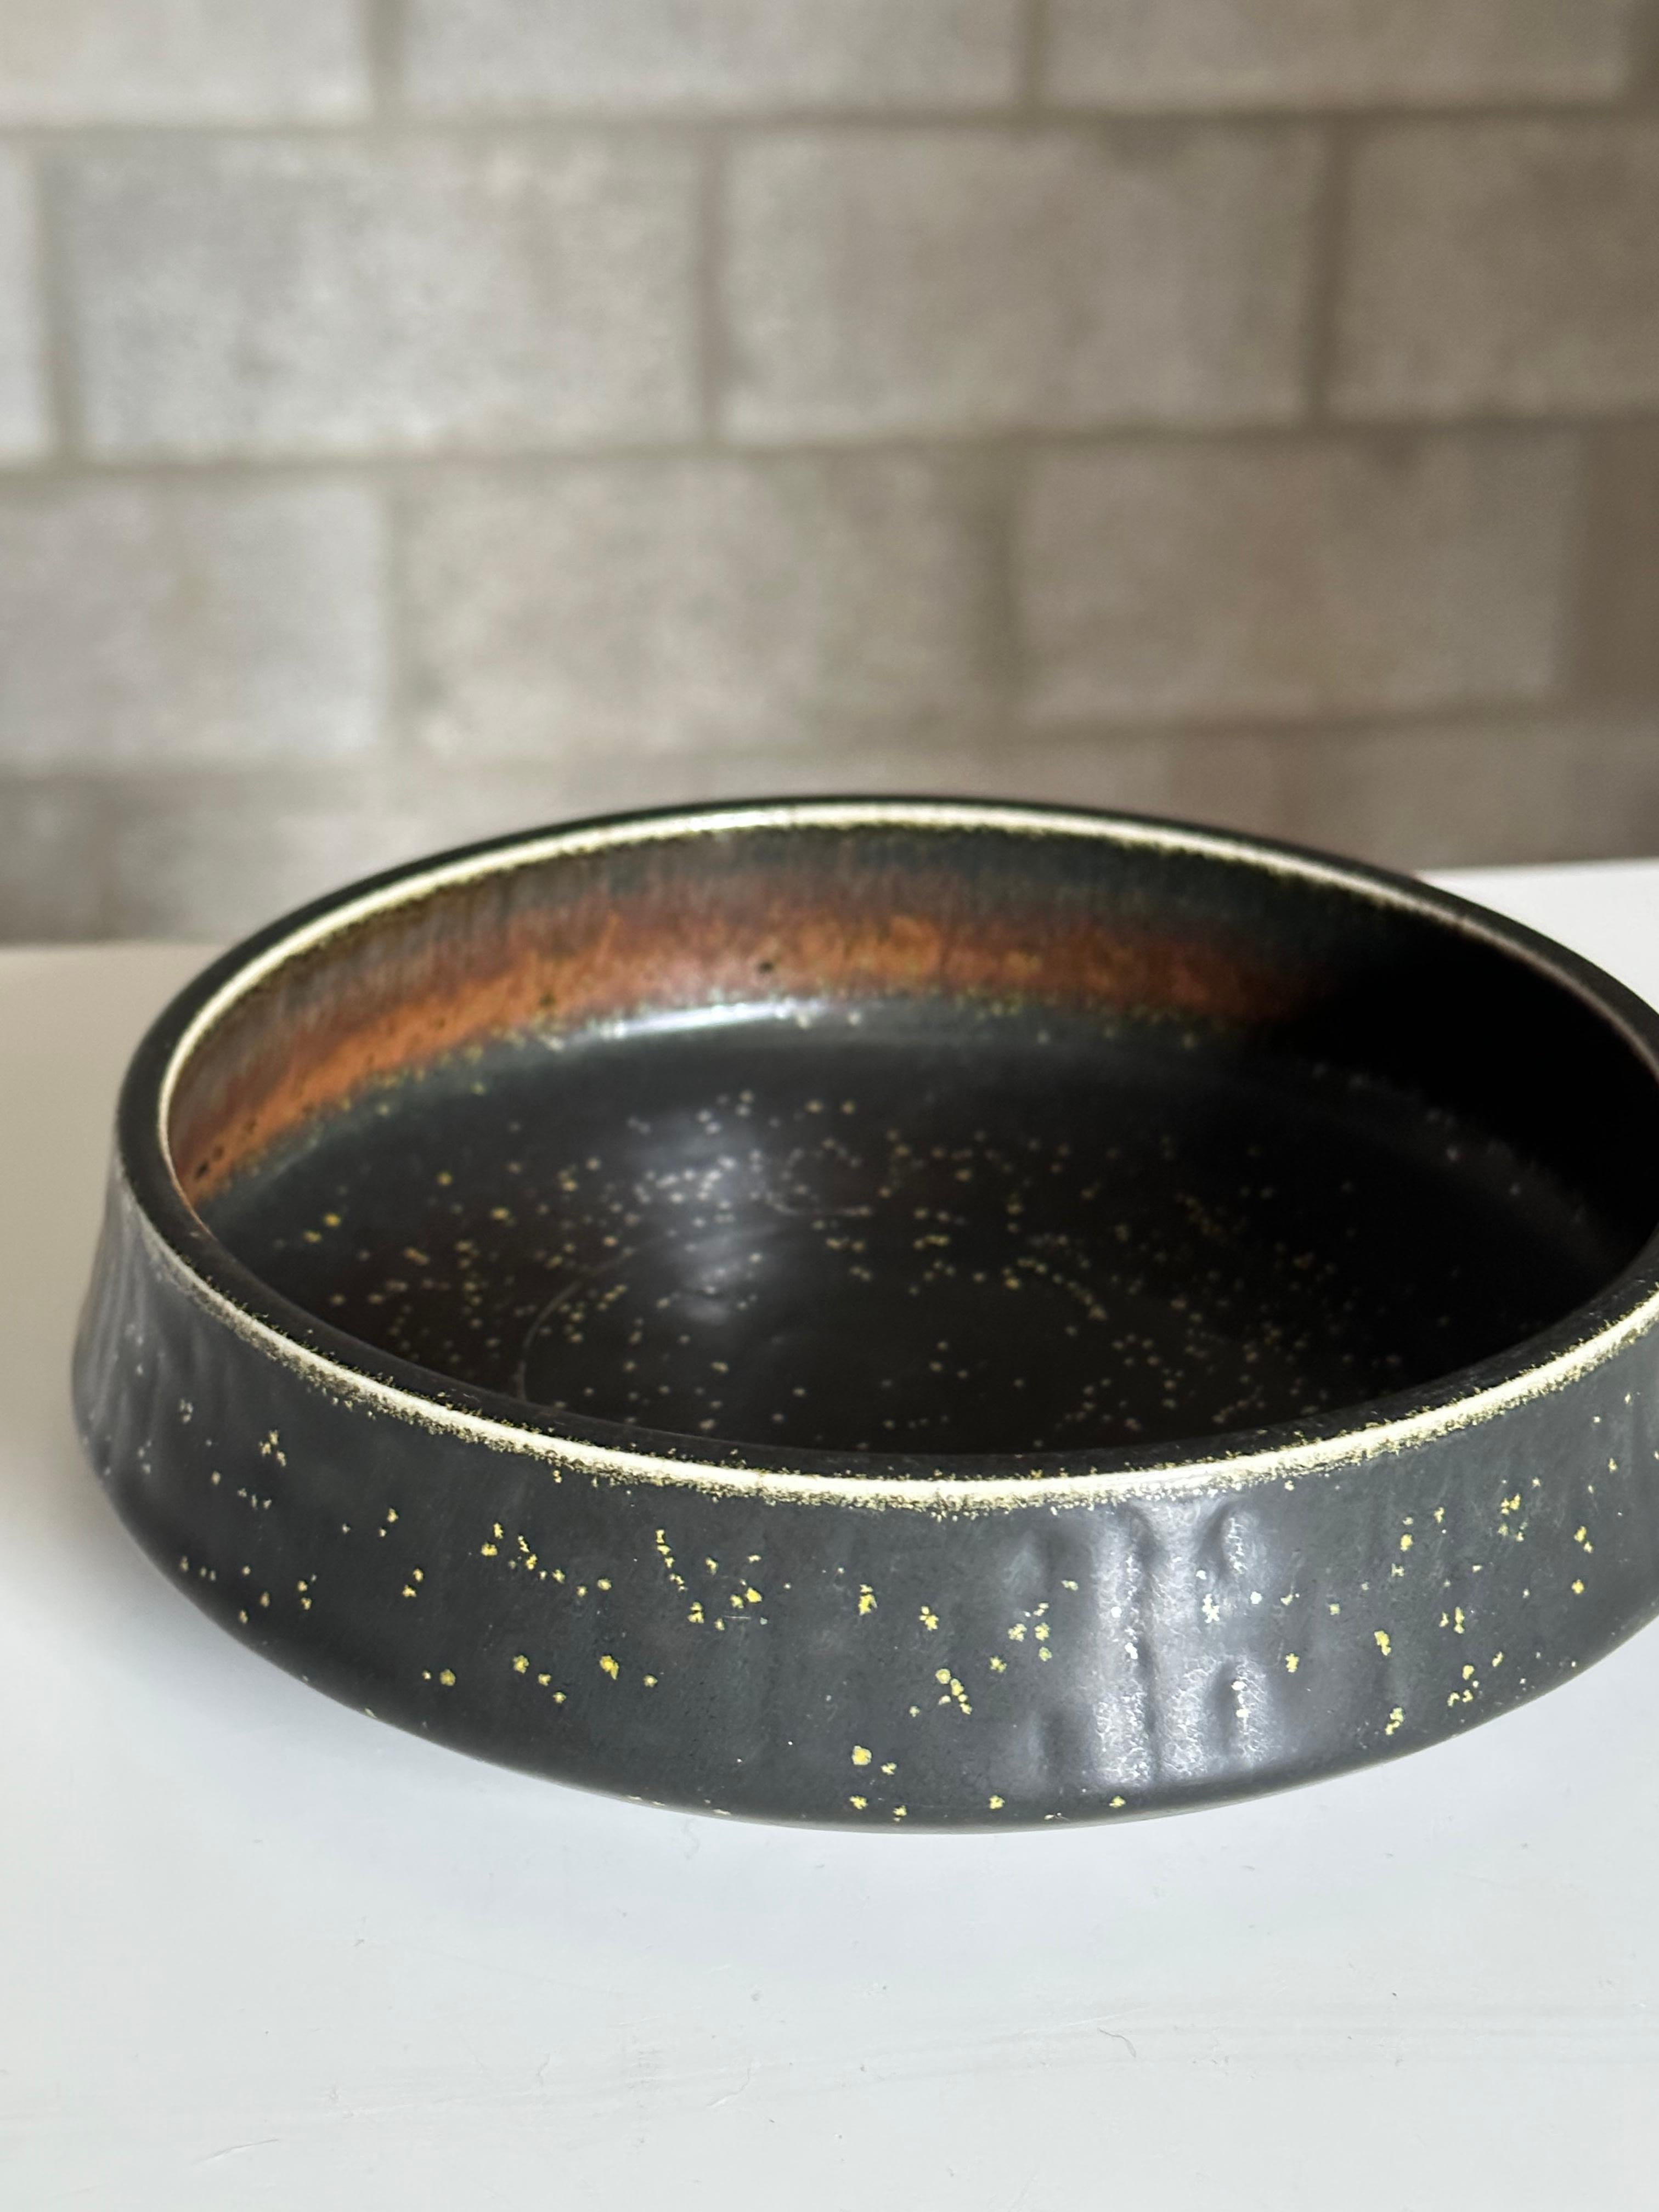 A unique bowl designed by Carl Harry Stålhane for Rörstrand. Bowl features a dramatic dark almost black glaze with speckles. The inside has hues of dark brown transitioning to light brown around the rim.